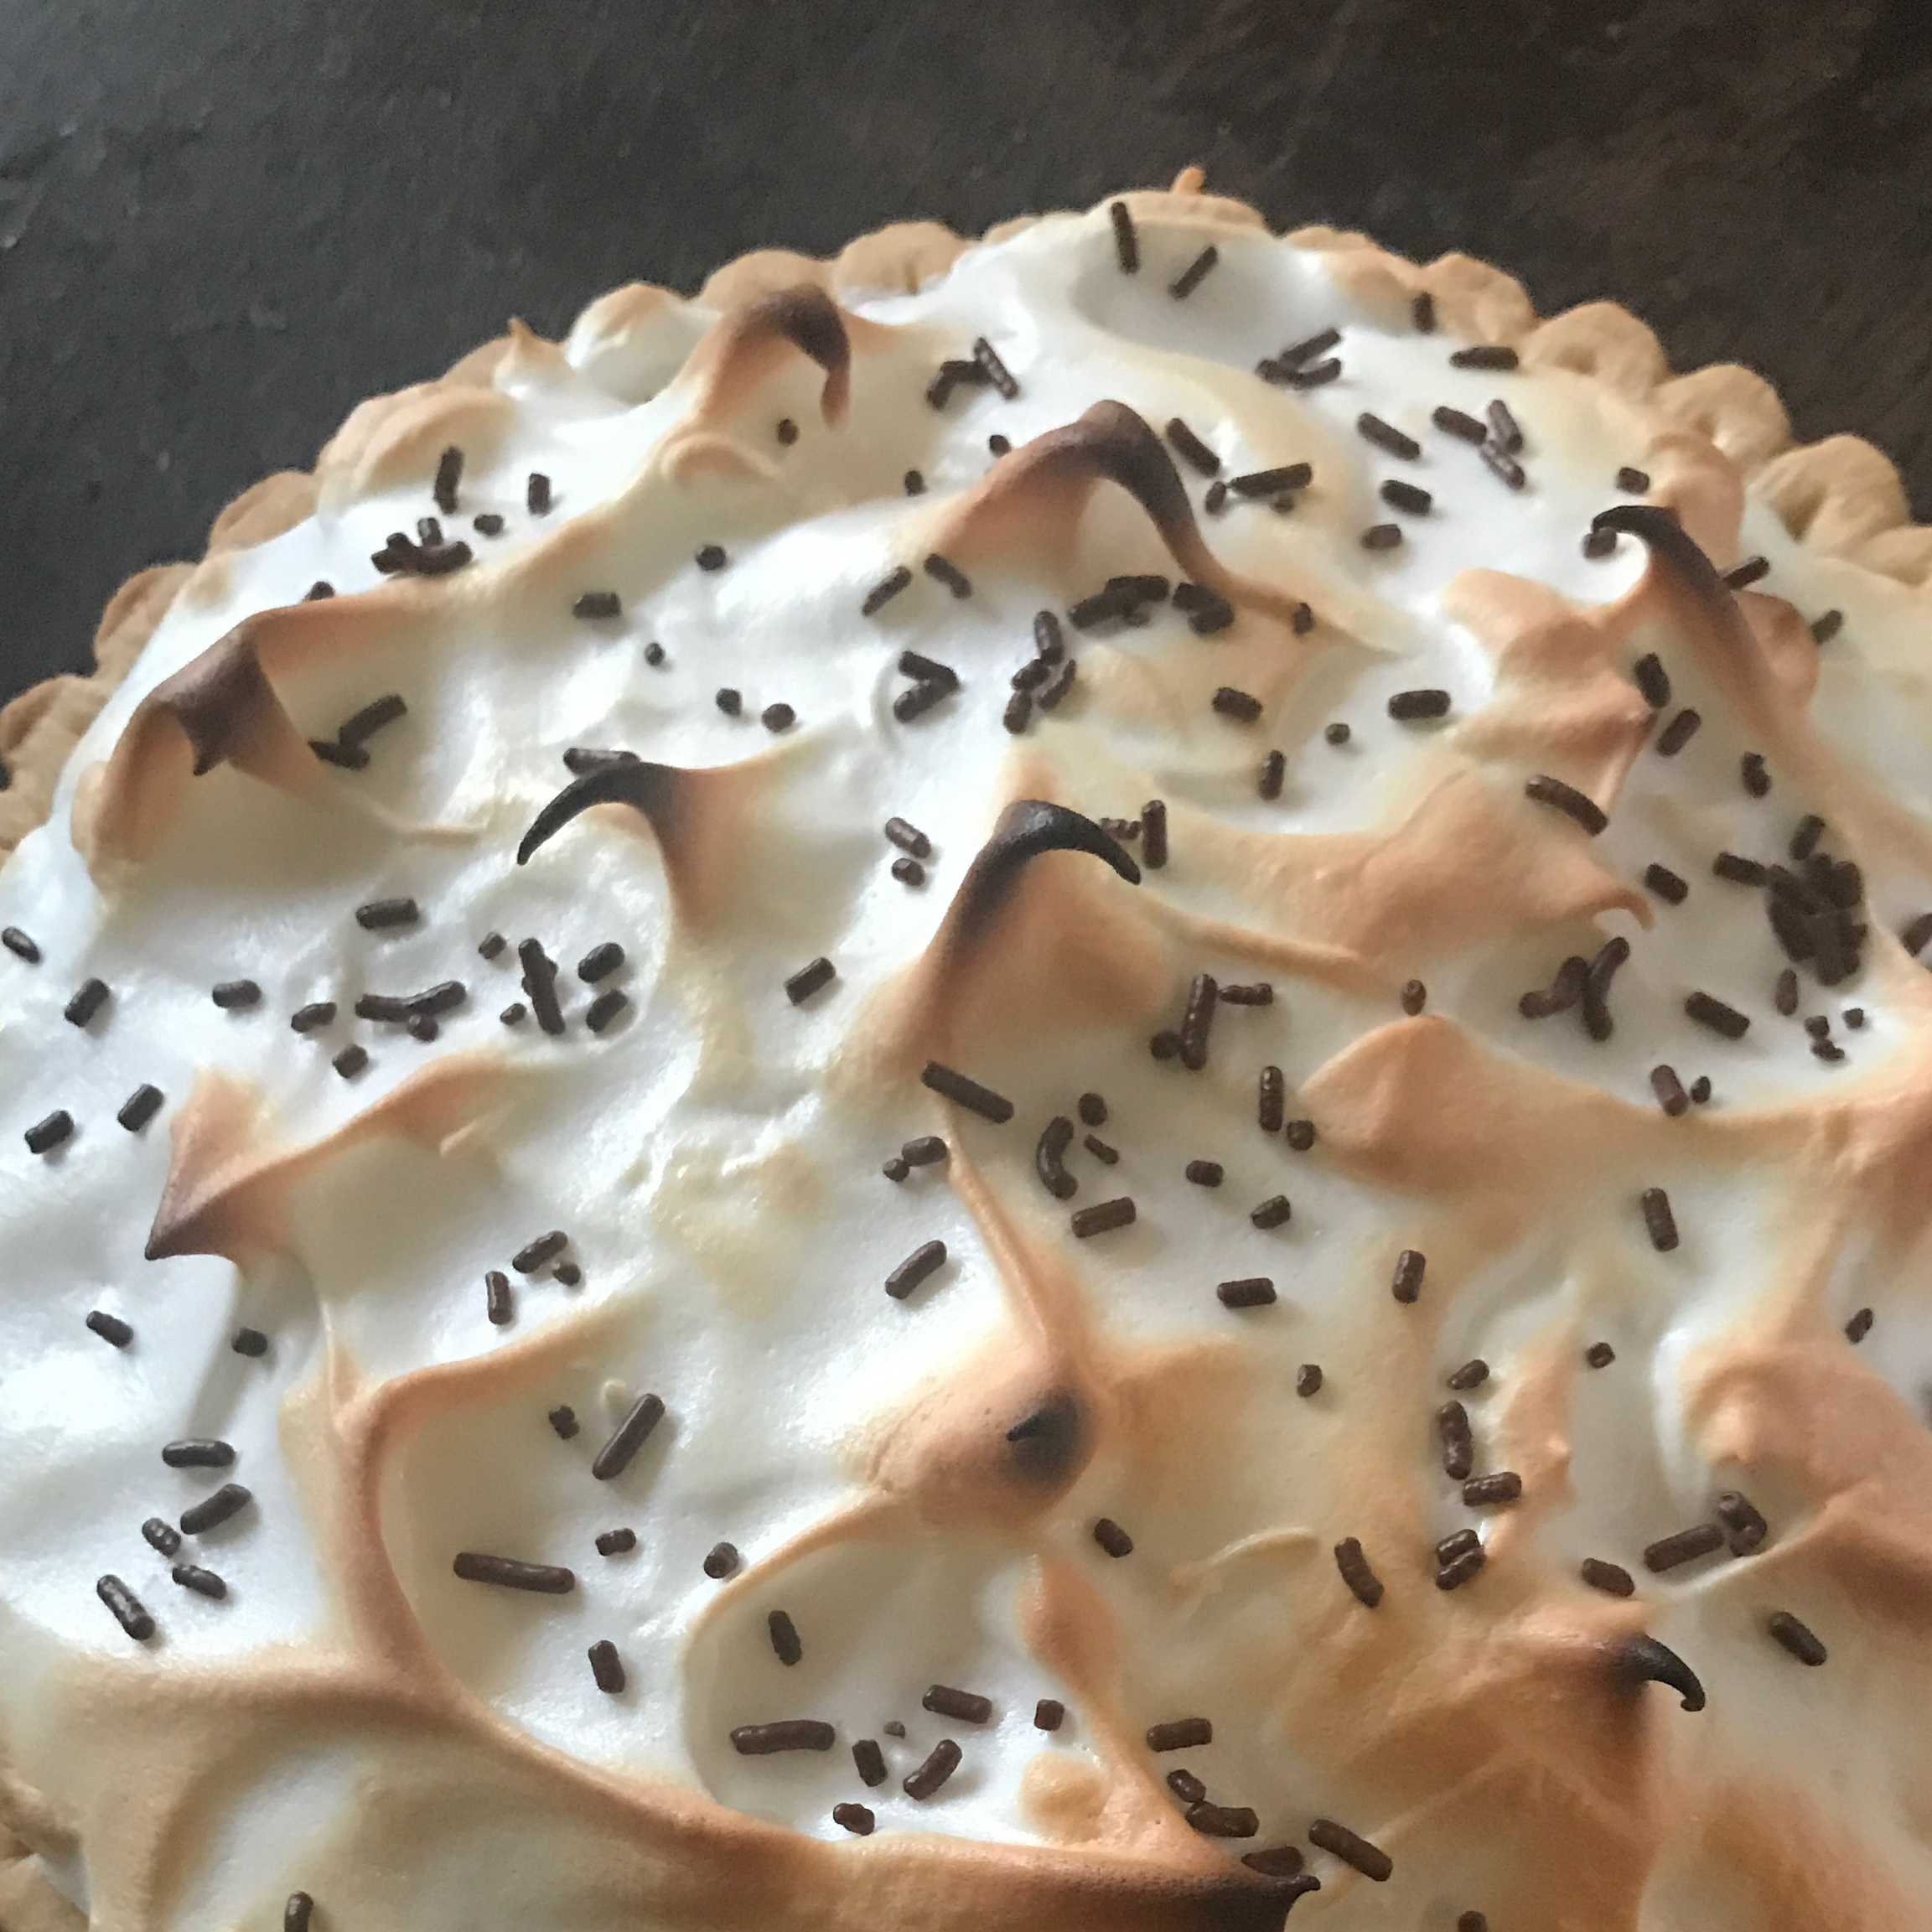 <p>Homemade chocolate custard is topped with meringue in this sensational pie. Home cook micholas says: "The best chocolate pie I've made yet - I didn't change a thing. I've tried many over the years and they always seem to disappoint. This one did not!"</p>
                          